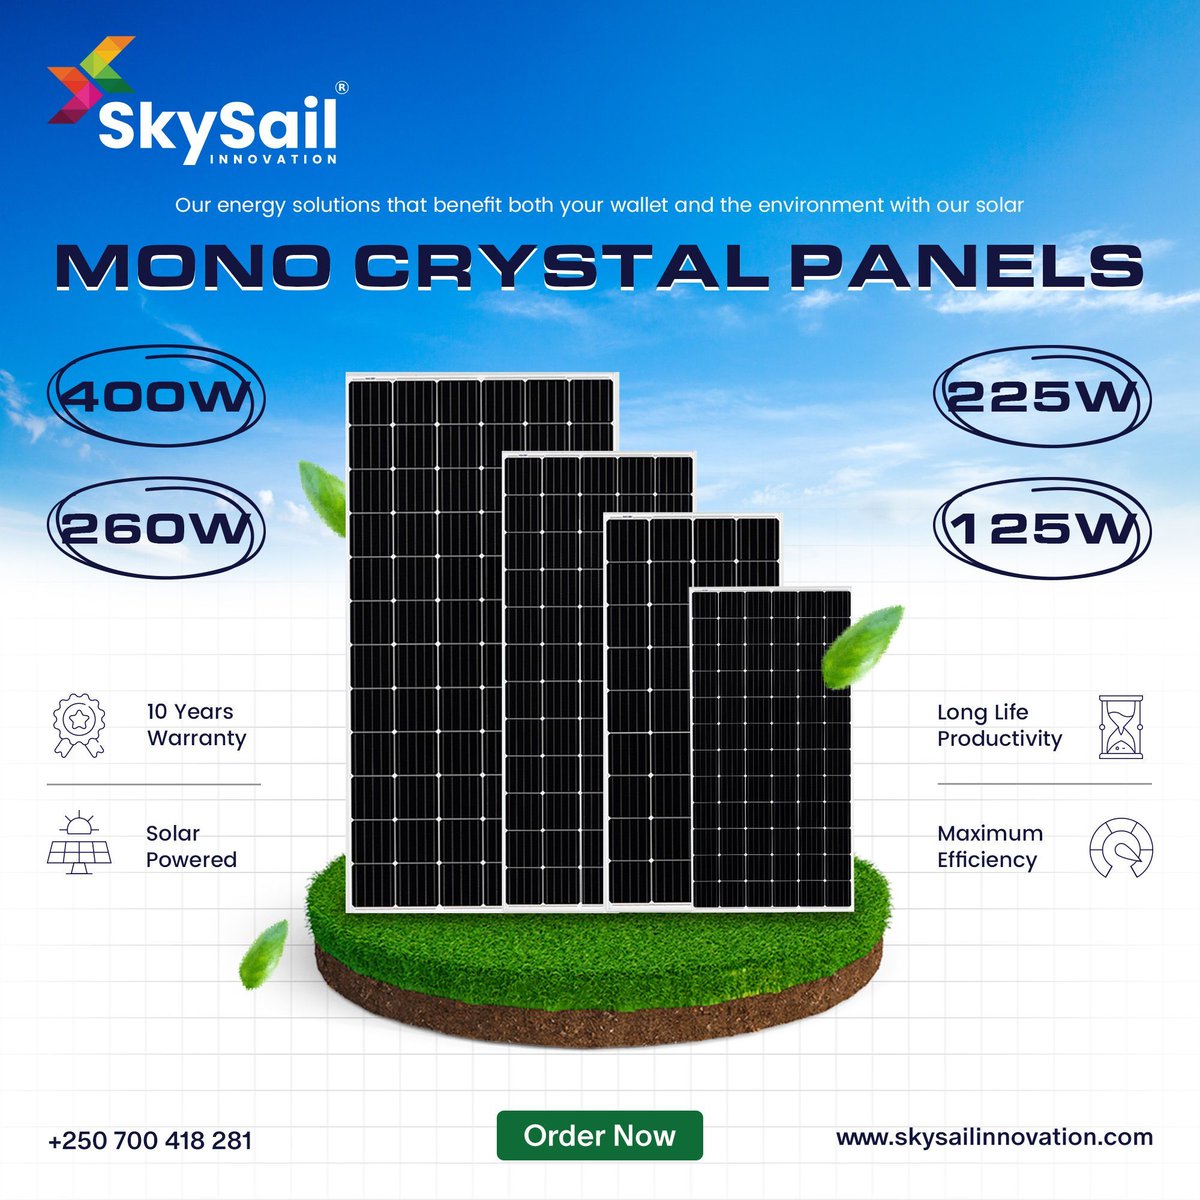 💰 Save money while saving the planet with SkySail Innovation's Solar Mono Crystal Panels!  From 125W to 400W, our range offers energy solutions that benefit both your wallet and the environment. Embrace sustainability without compromising on performance!  #SkySailInnovation